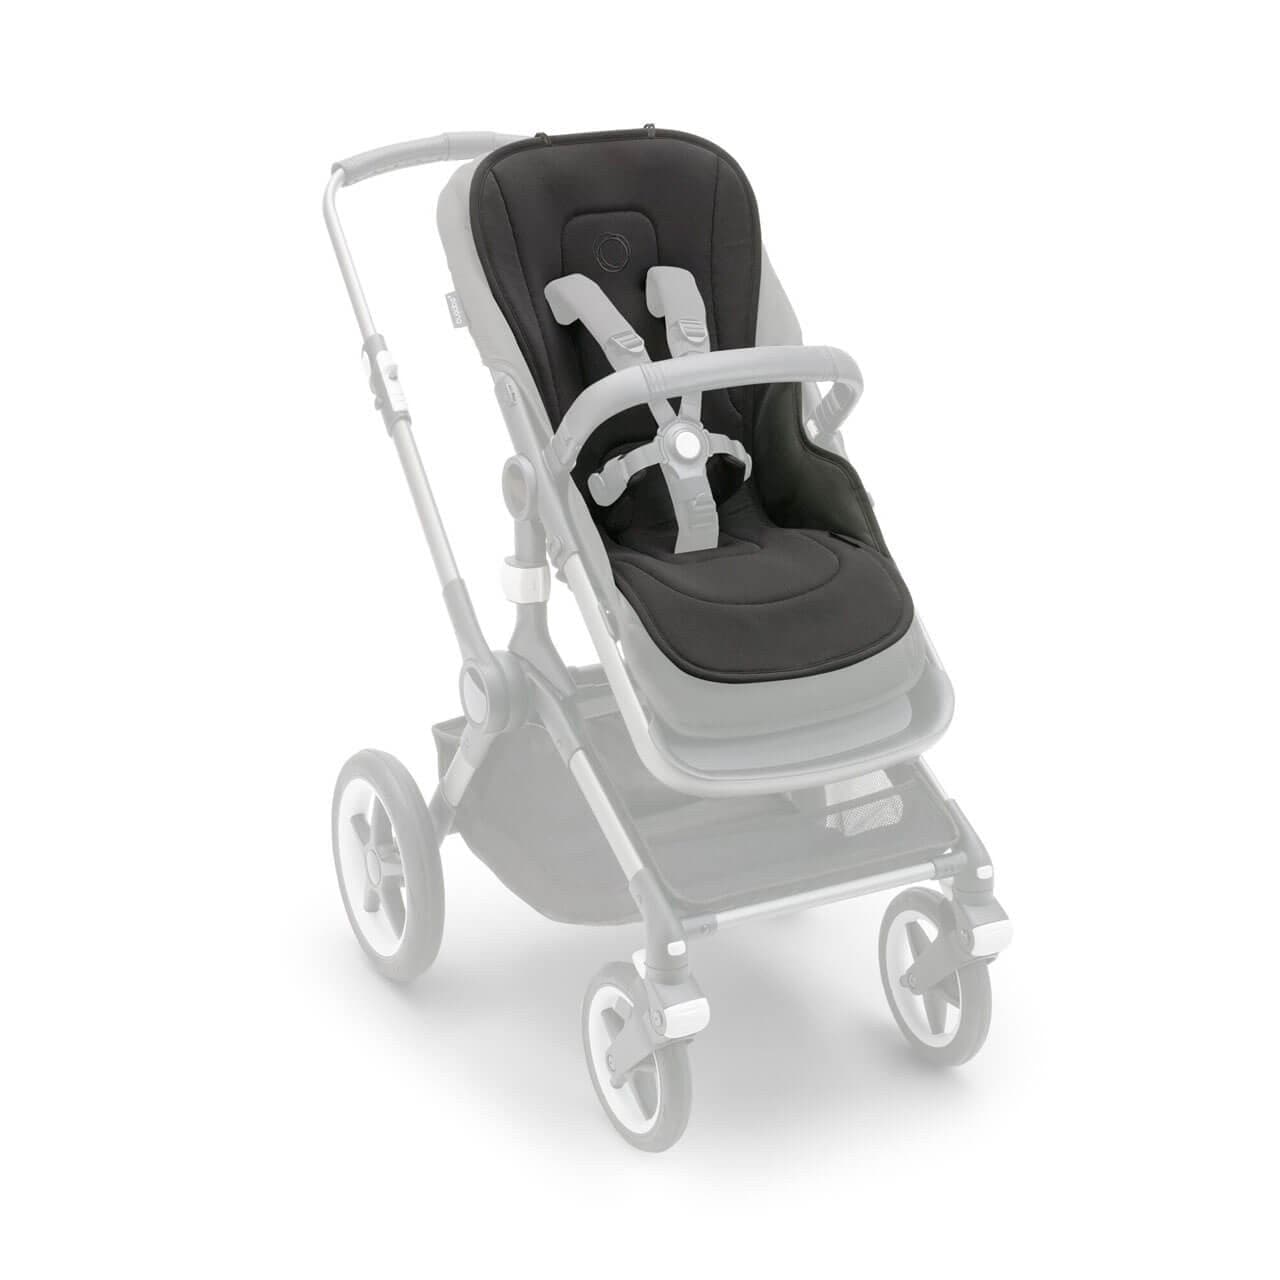 Bugaboo Dual Comfort Seat Liner - Midnight Black - For Your Little One